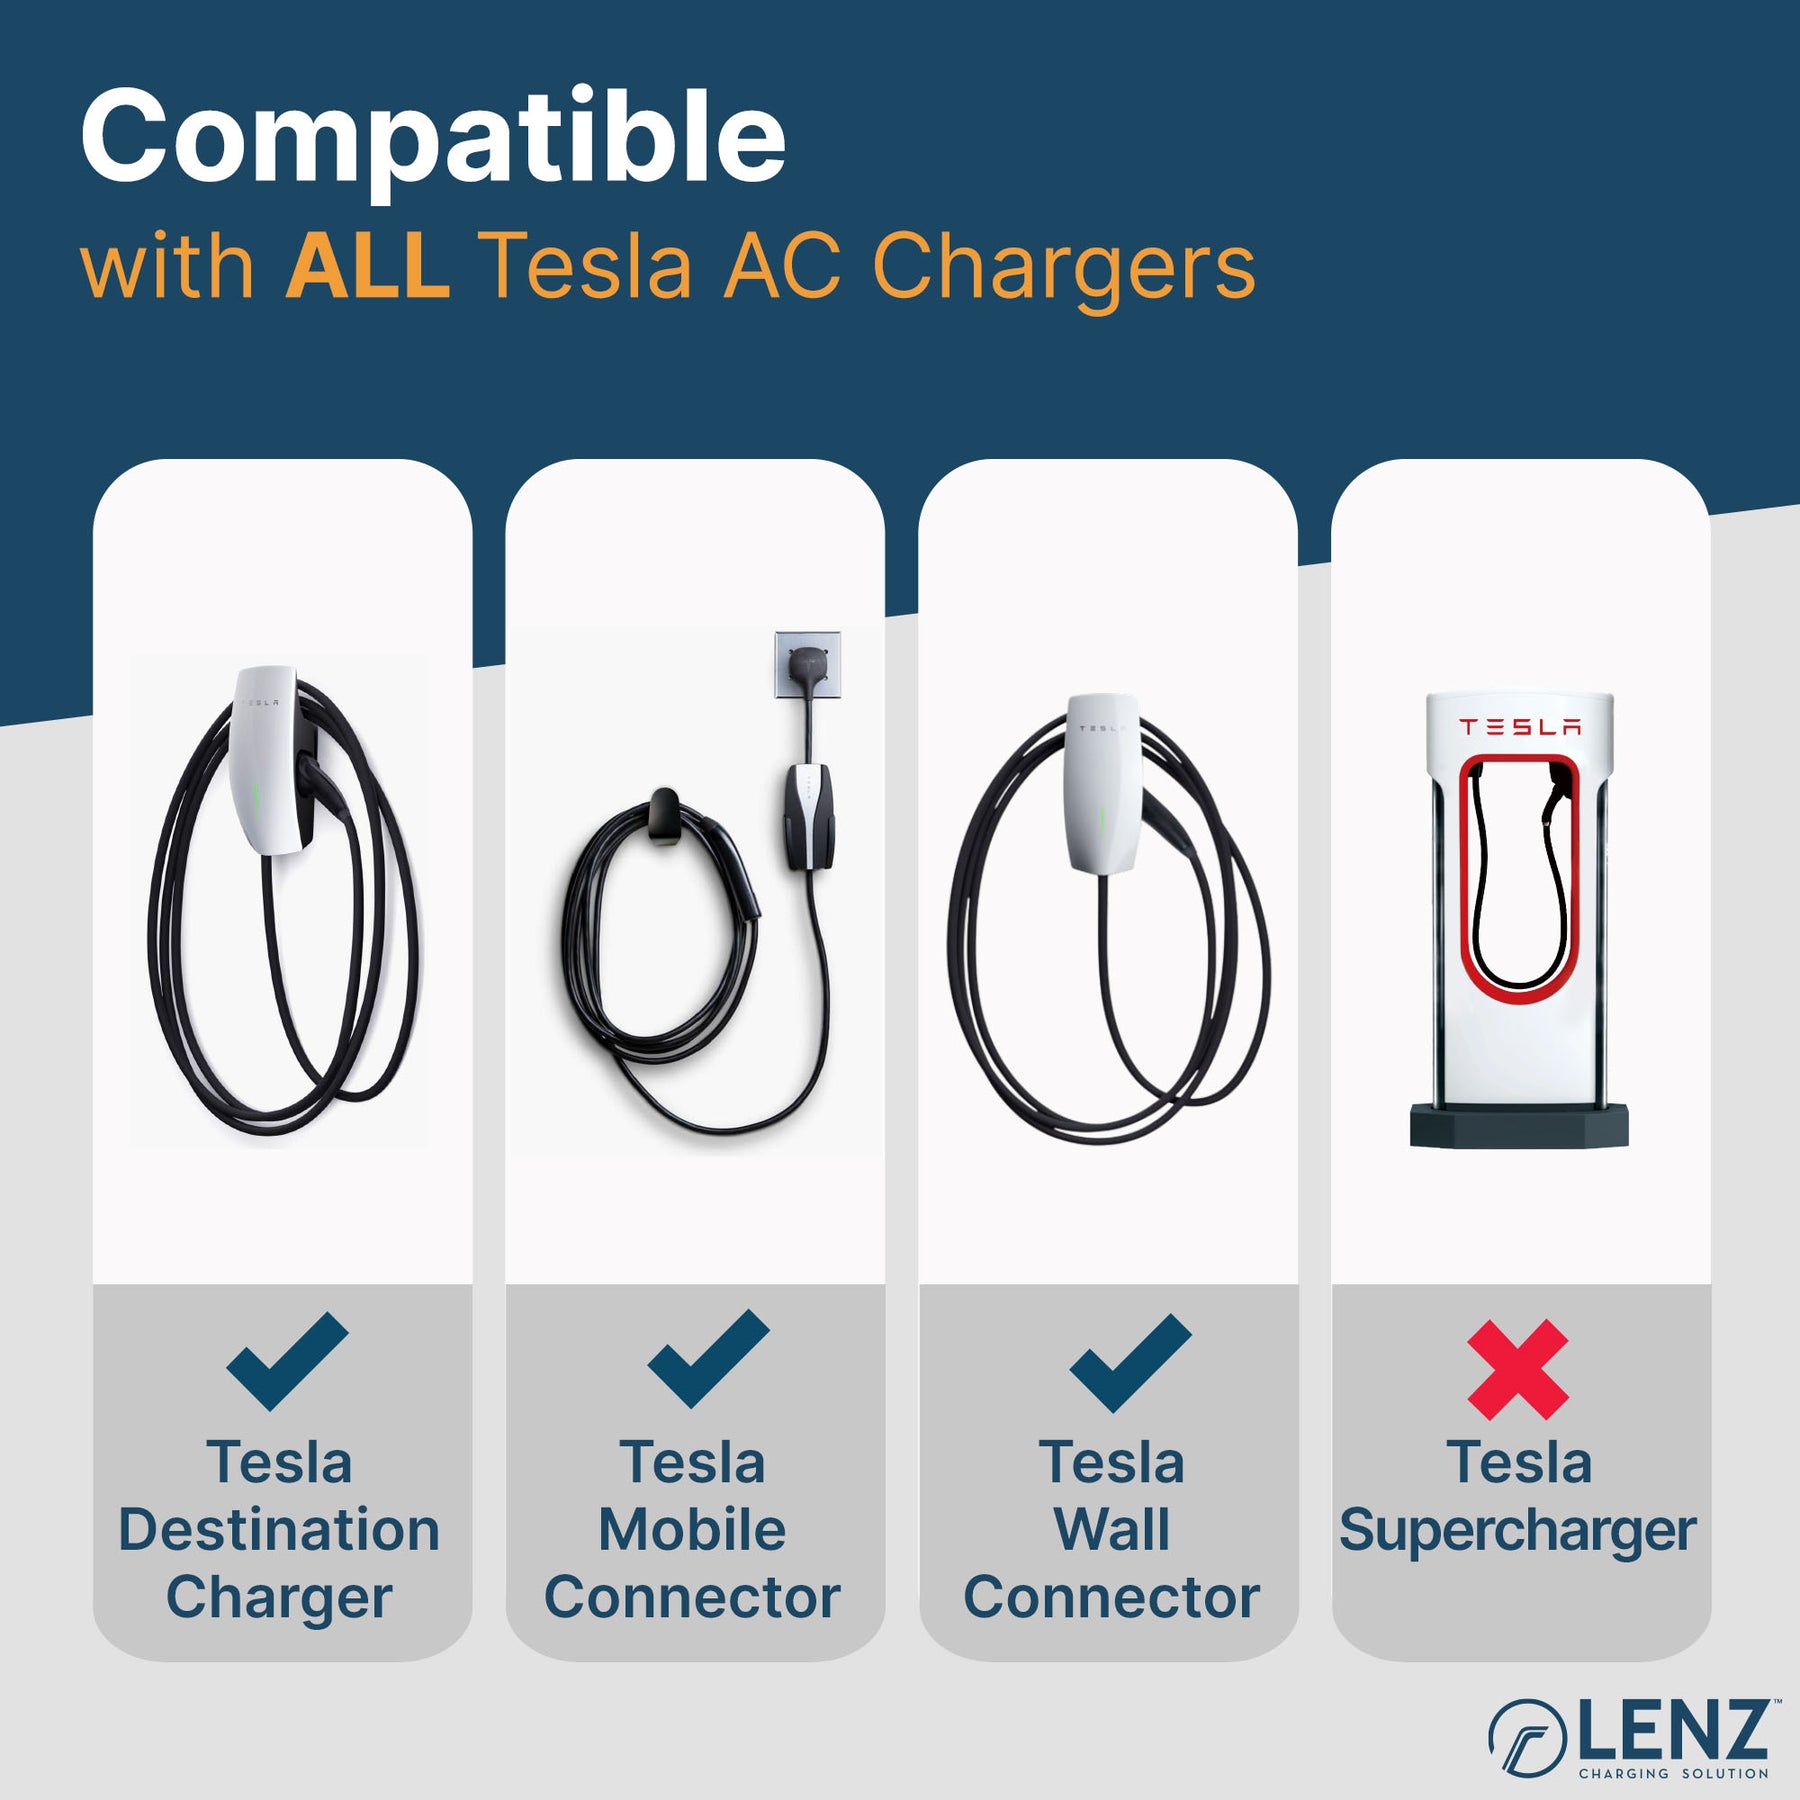 LENZ NACS to J1772 Charging Adapter (Connect NON-Tesla EVs to Tesla AC Charging Stations and Connectors)